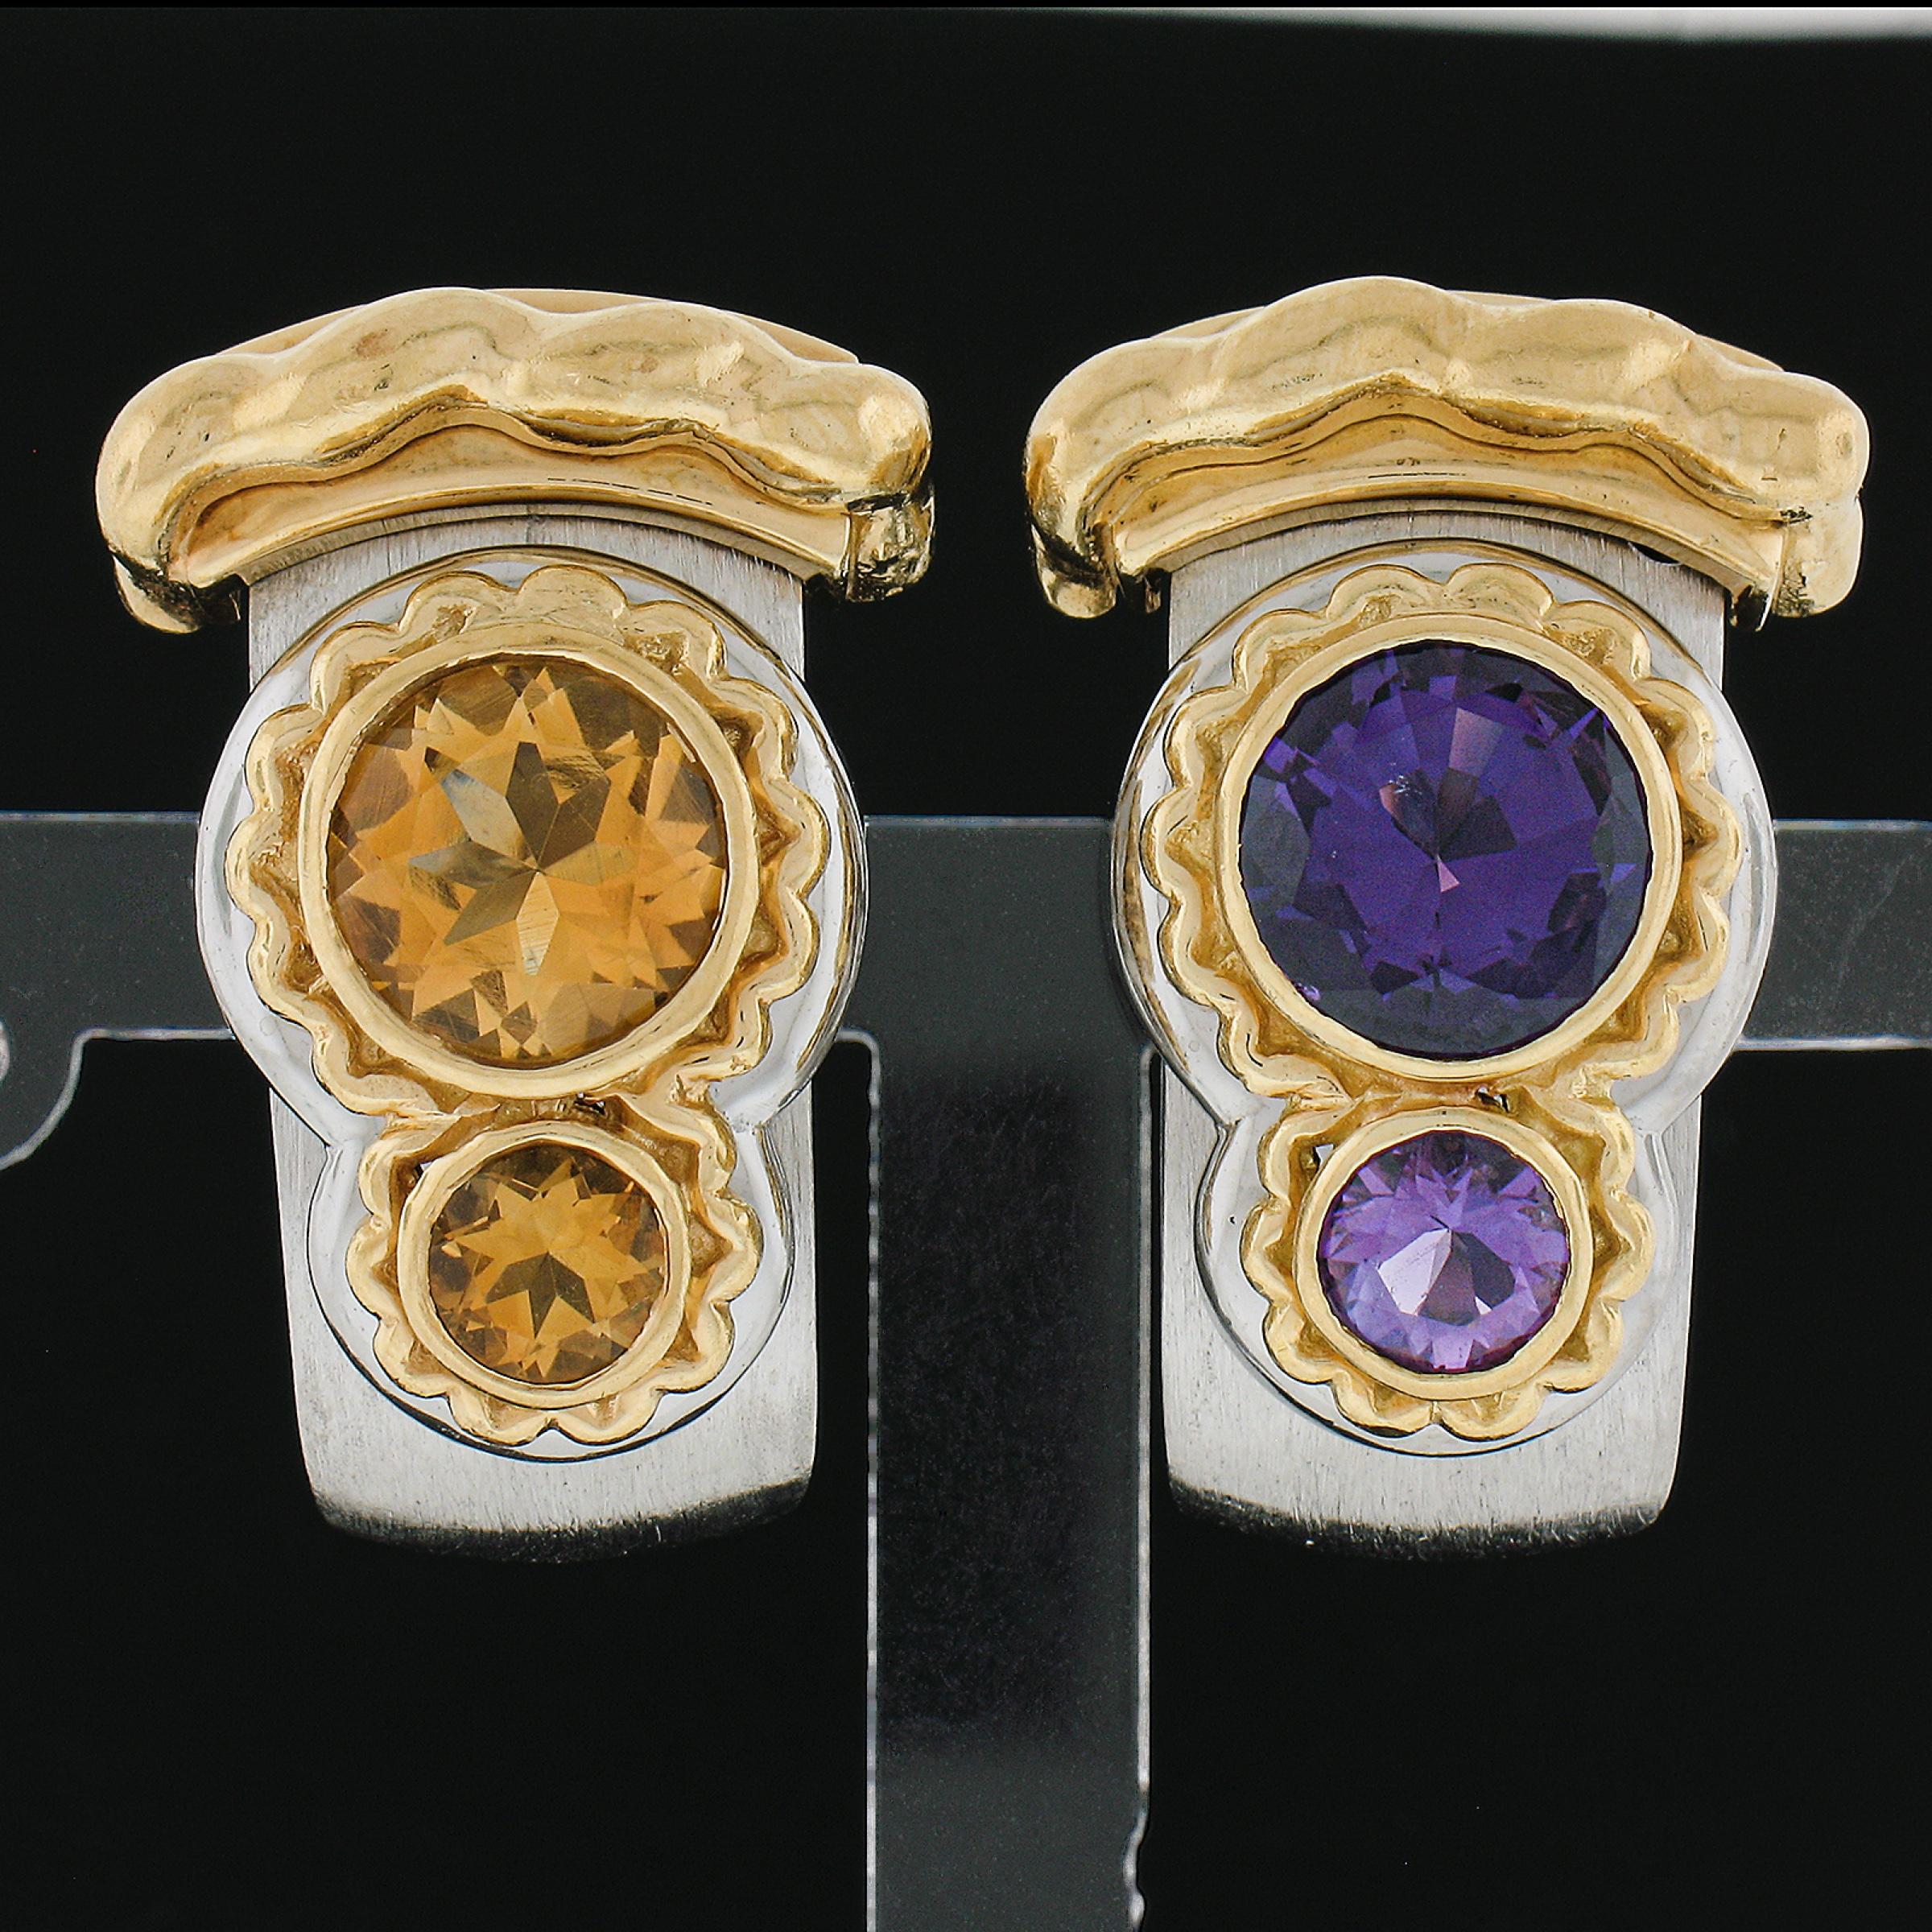 --Stone(s):--
(2) Natural Genuine Citrine - Round Cut - Bezel Set - Rich Orange Color - 4.8mm & 8.2mm (approx.)
(2) Natural Genuine Amethysts - Round Cut - Bezel Set - Rich Vivid Purple Color - 4.8mm & 8.2mm (approx.)

Material: Solid 18k Yellow